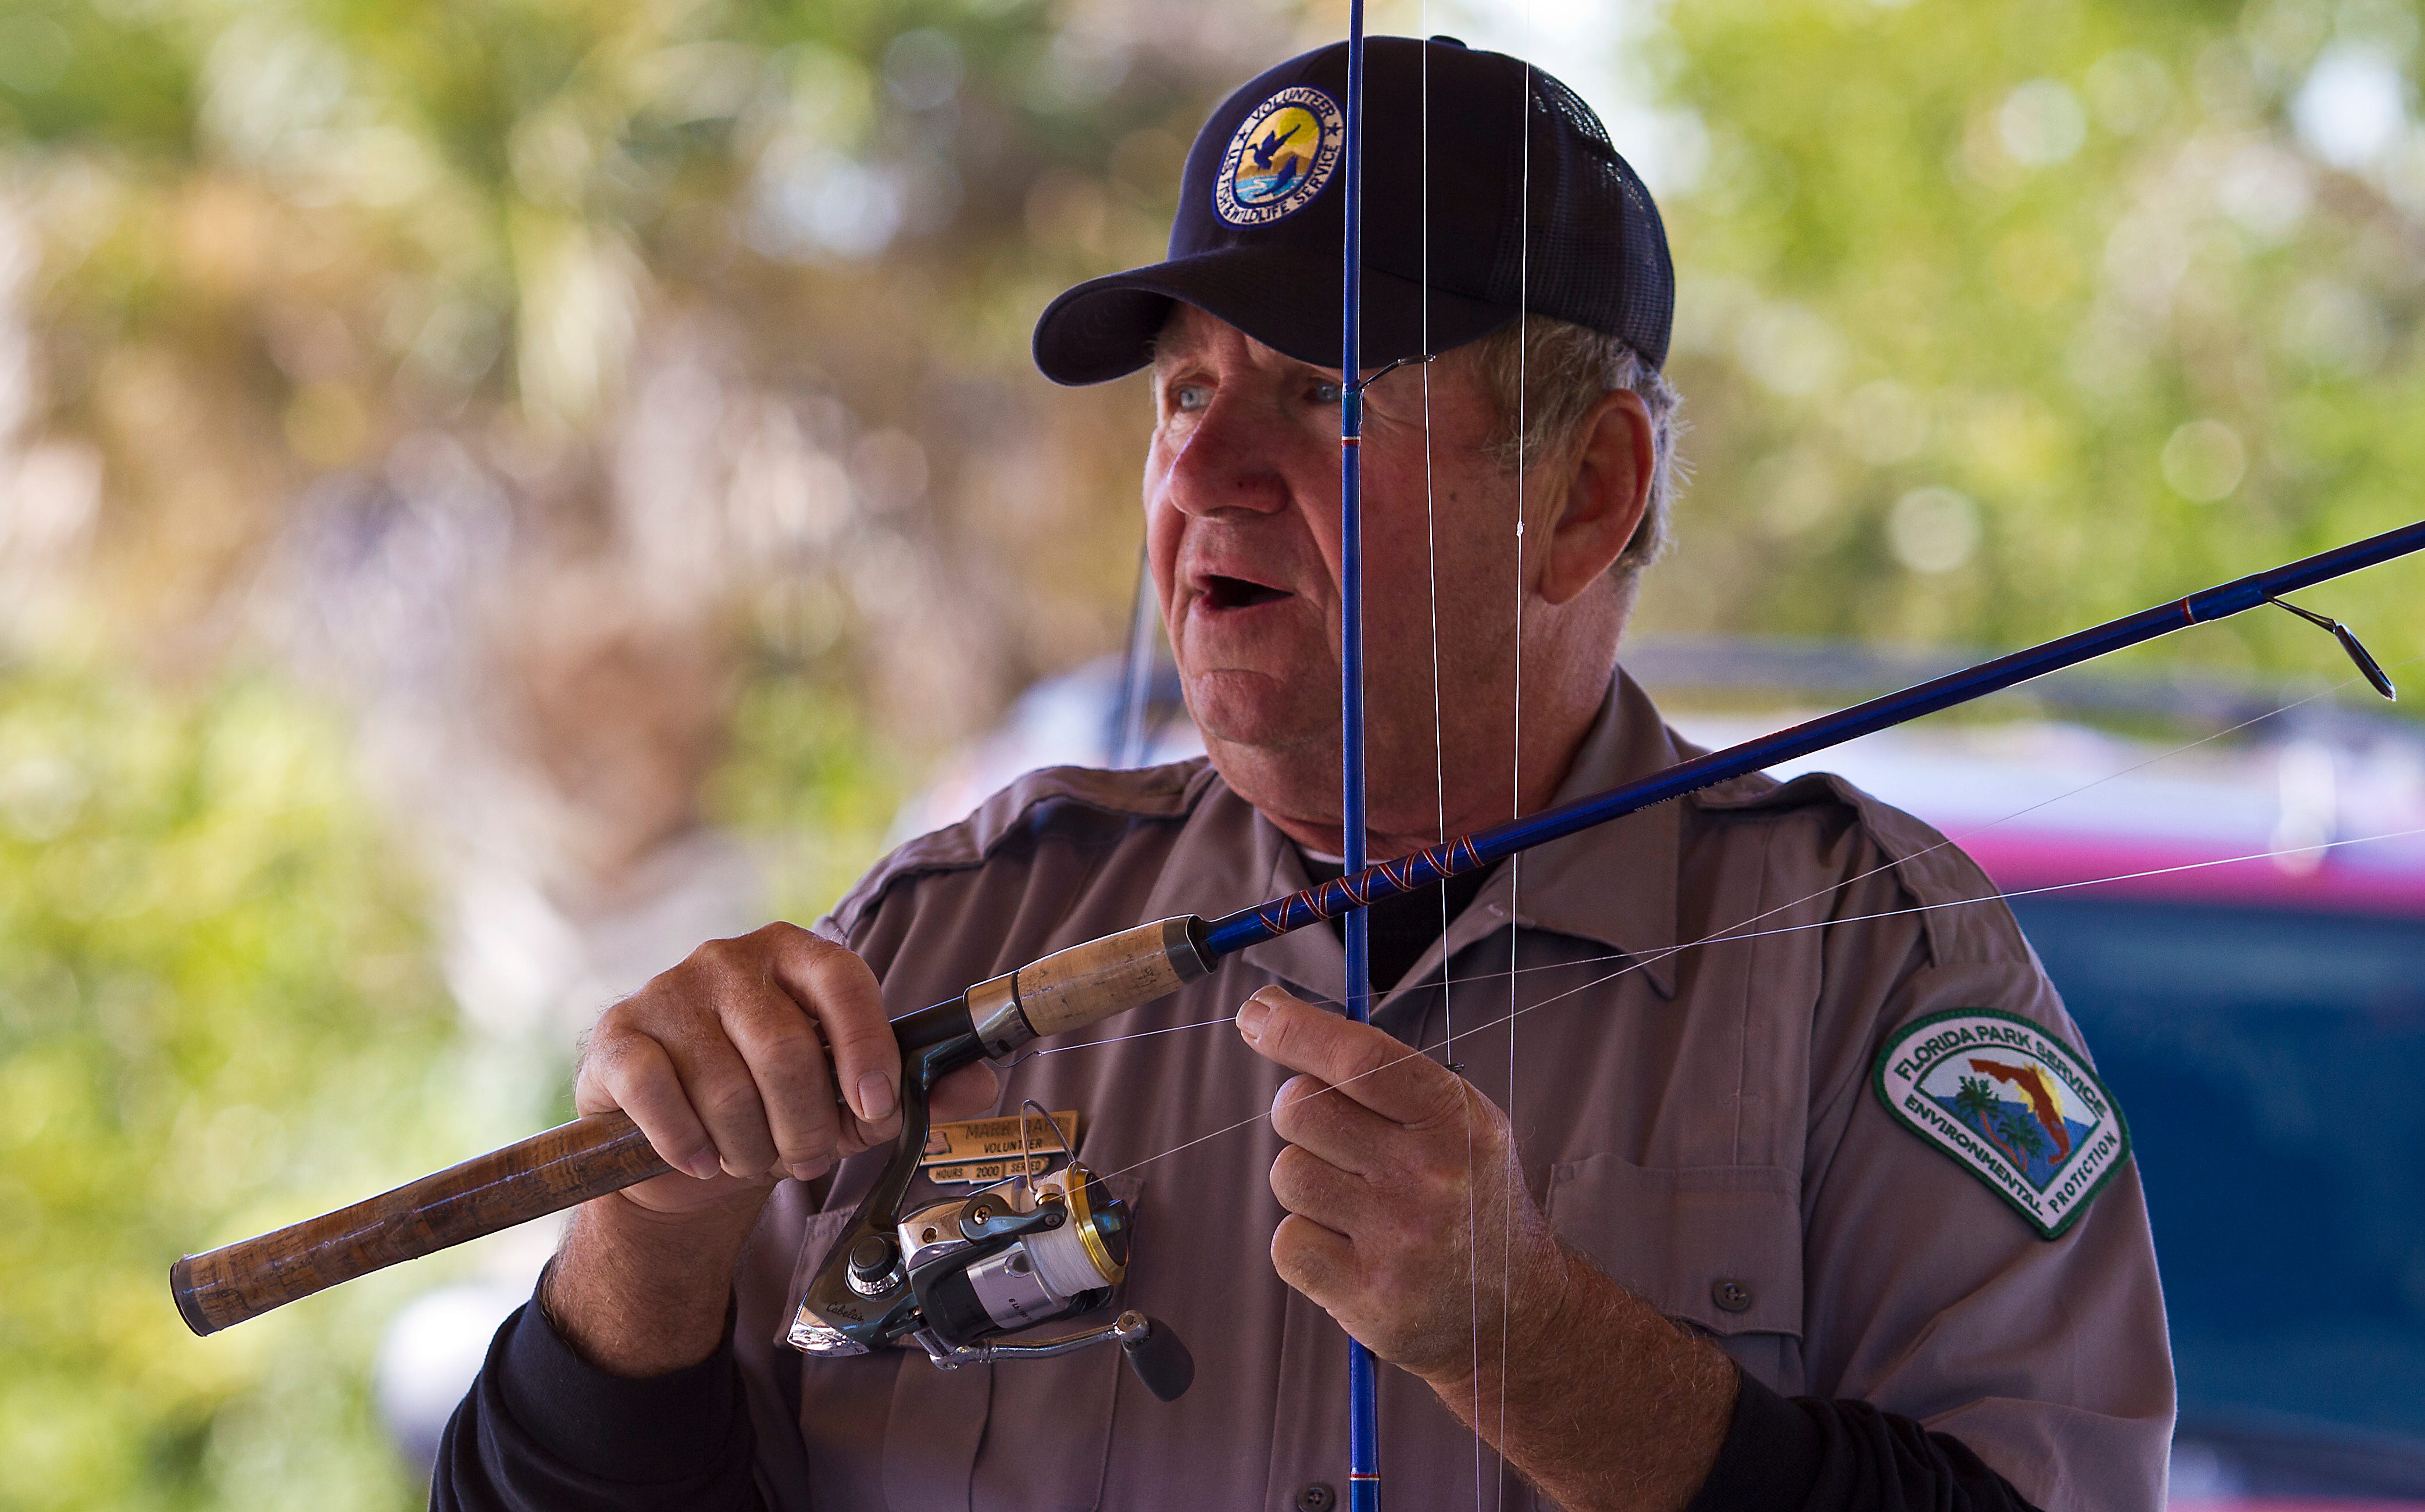 Learn to fish at Lovers Key clinic